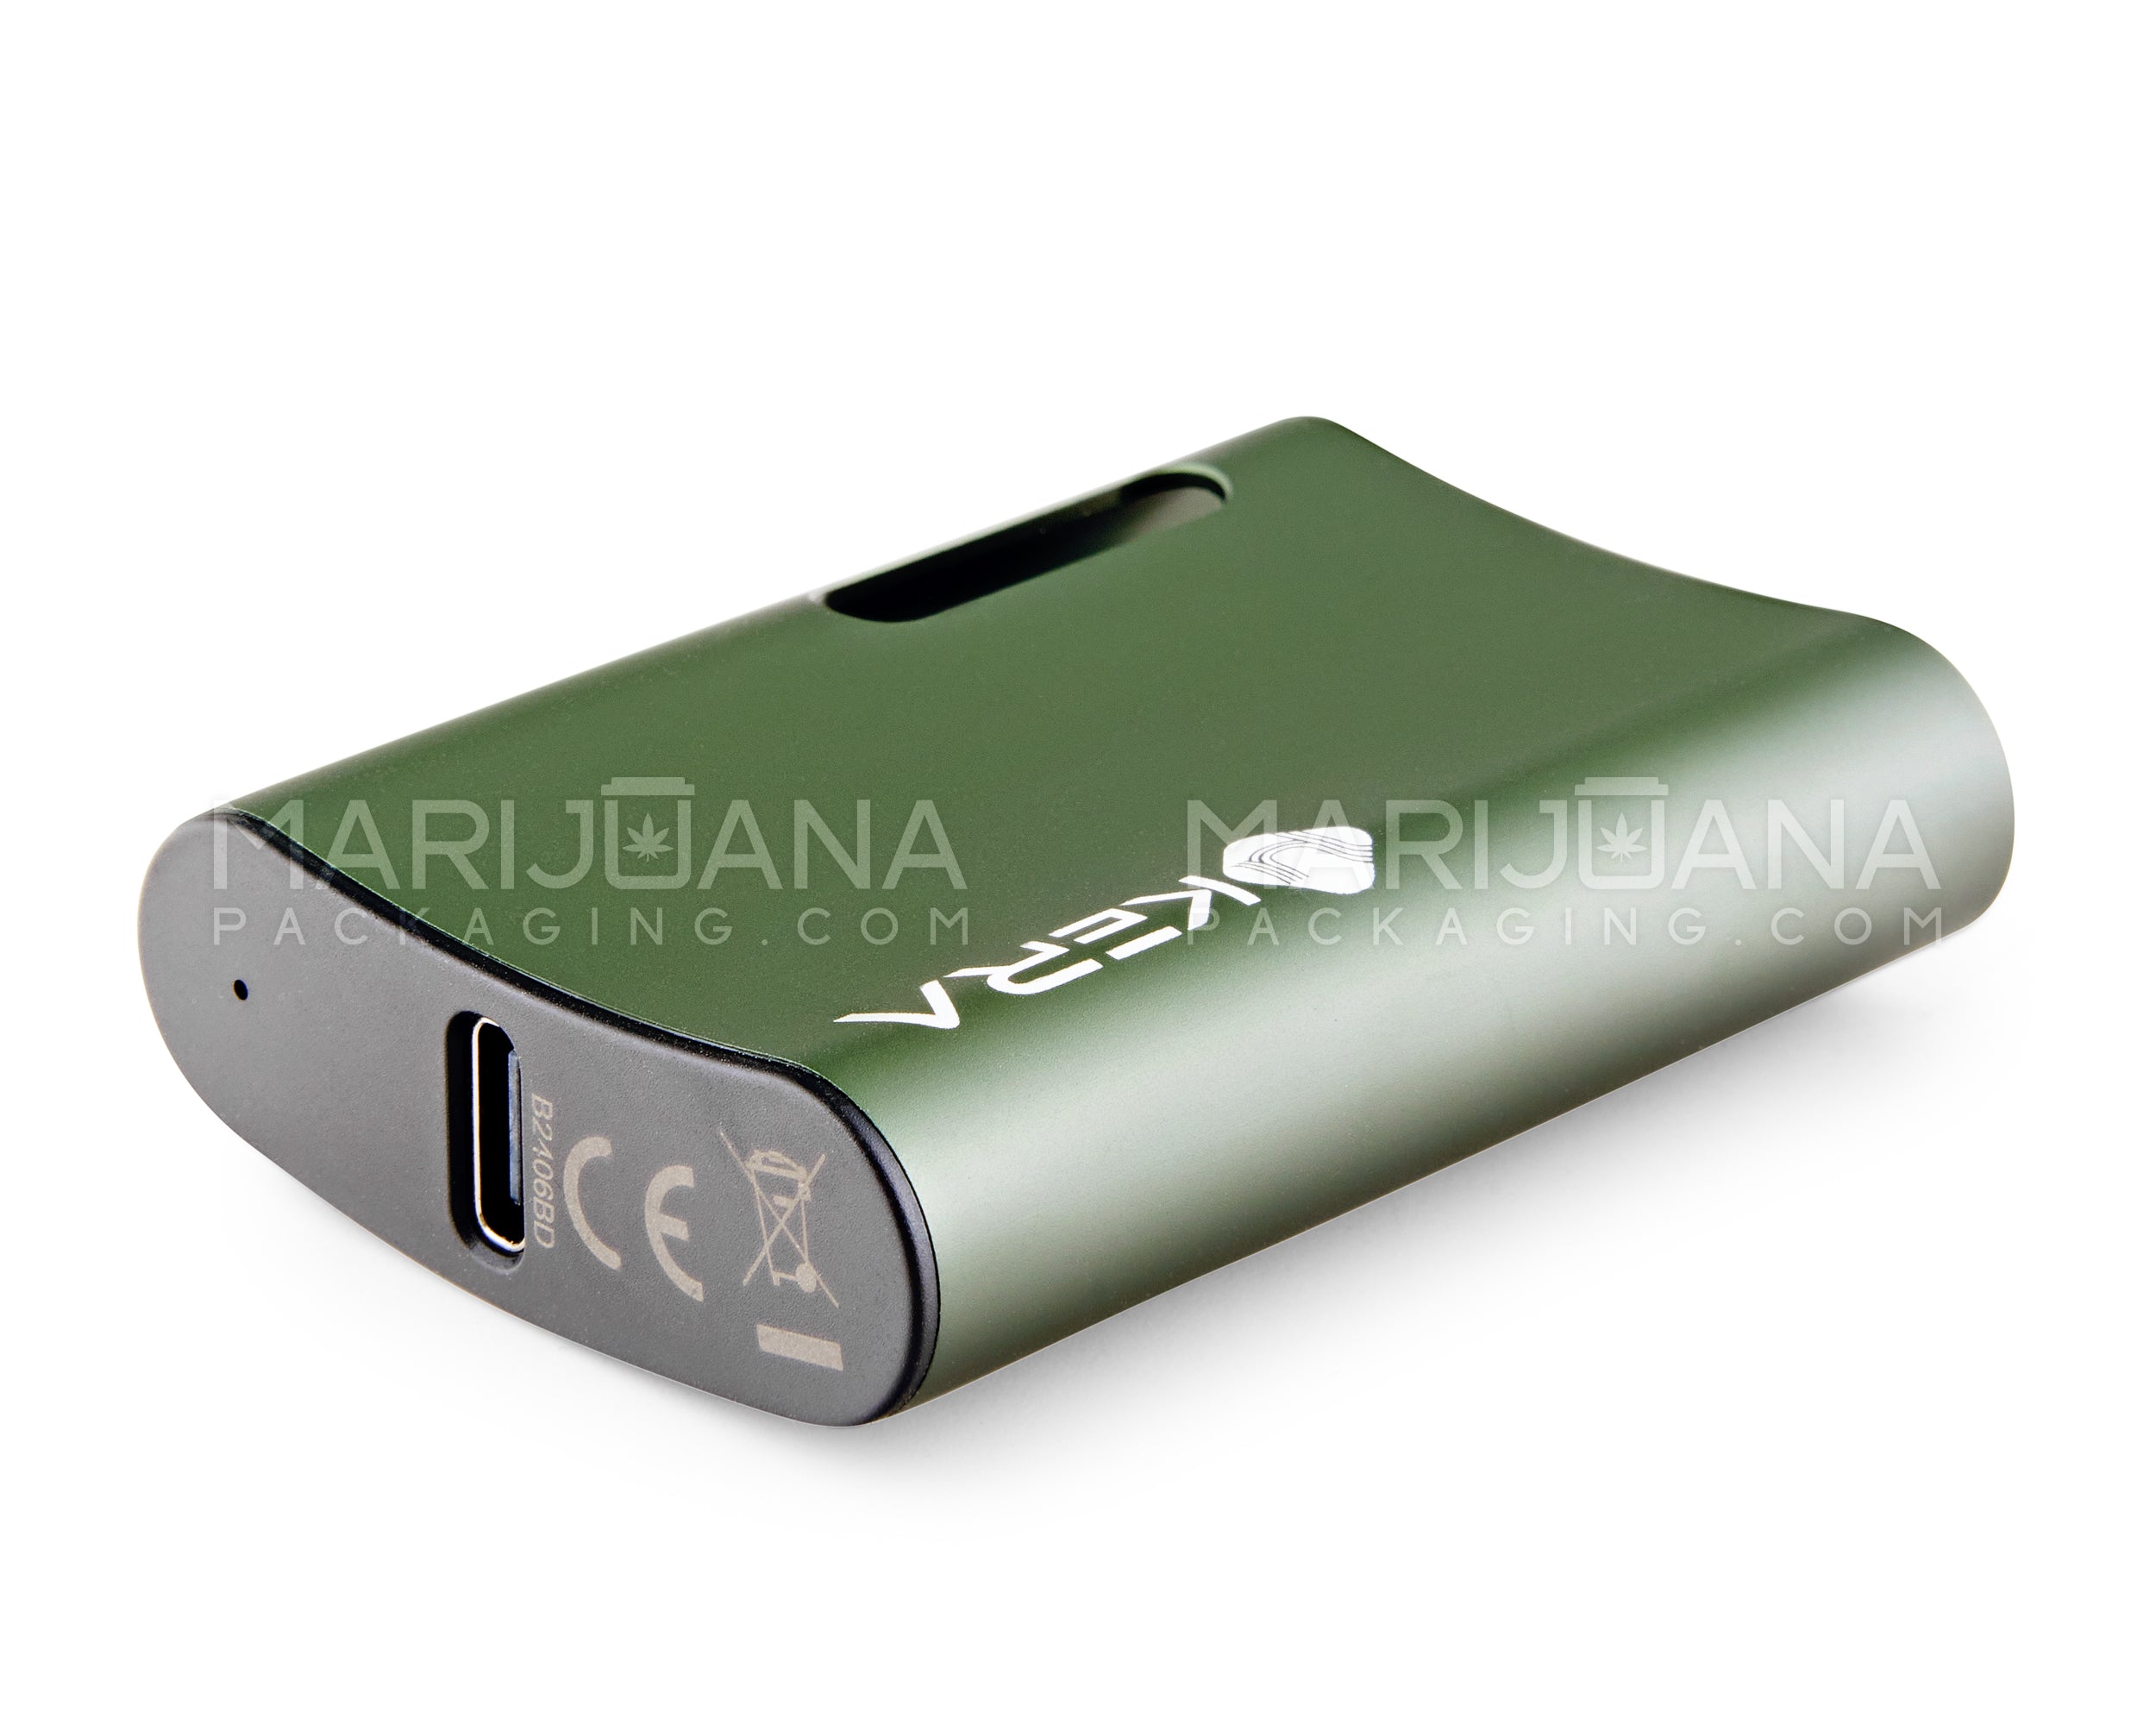 Vault SE 510 Thread Vape Battery with USB Charger | 500mAh - Alpine Green - 1 Count